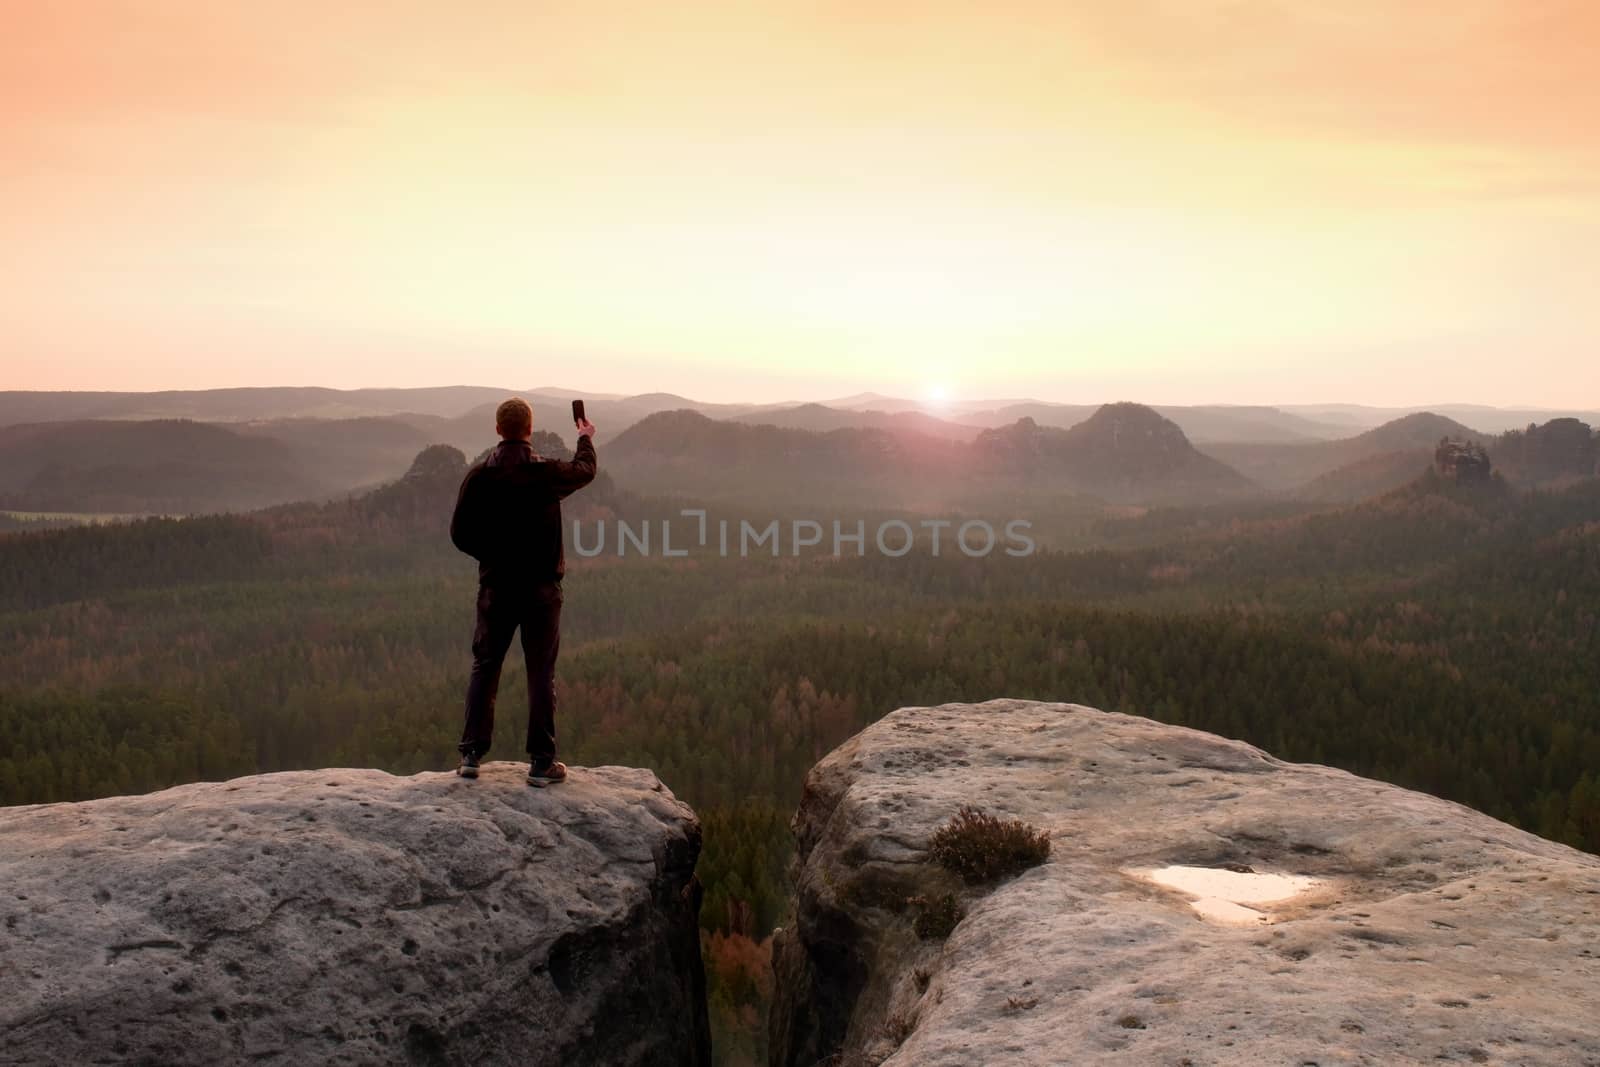 Man photography with phoneof  dreamy hilly landscape, spring orange pink misty sunrise in a beautiful valley of rocky mountains.